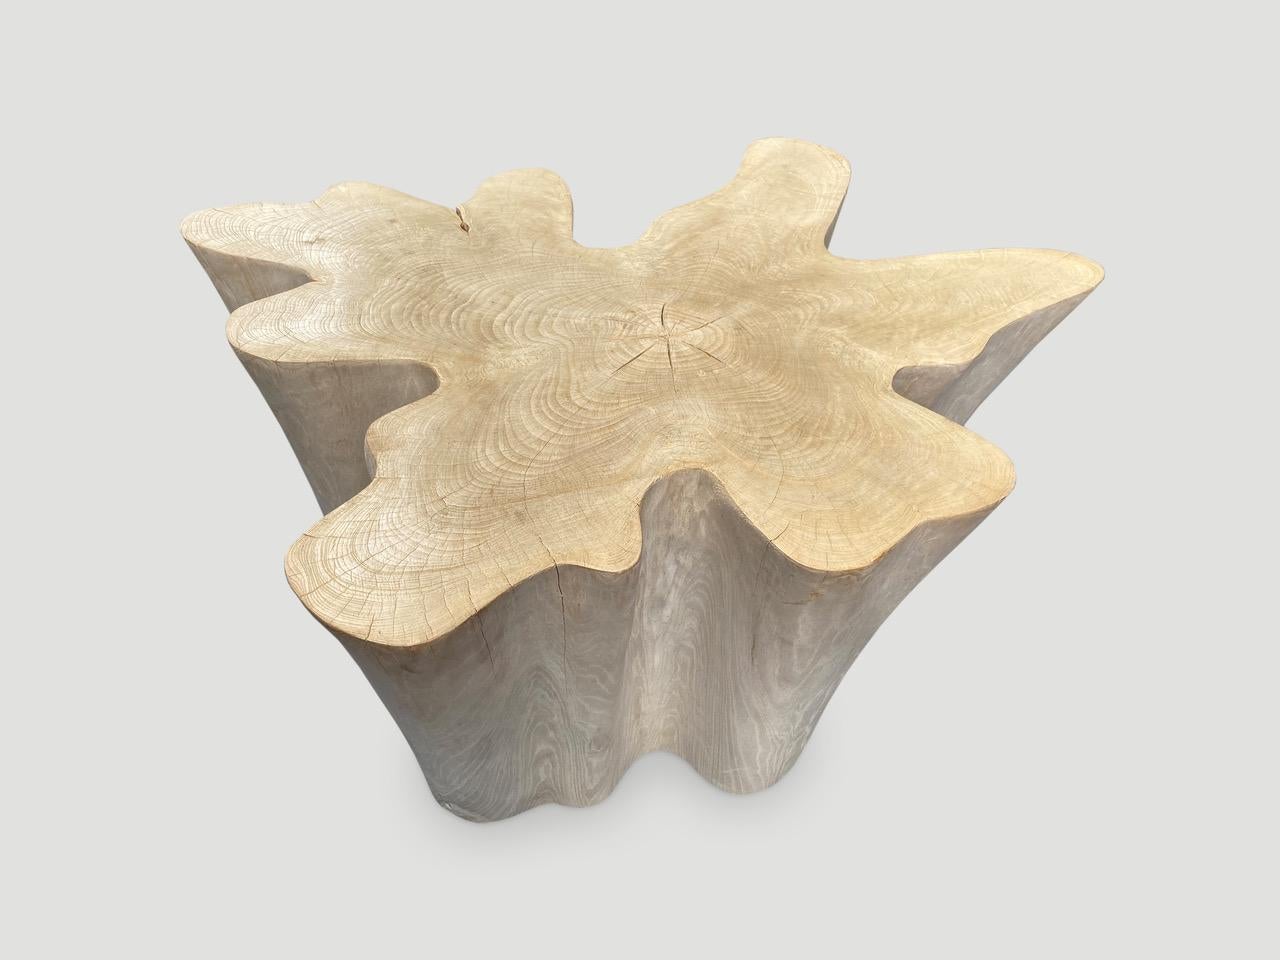 Contemporary Andrianna Shamaris Amorphous Bleached Teak Wood Coffee Table For Sale